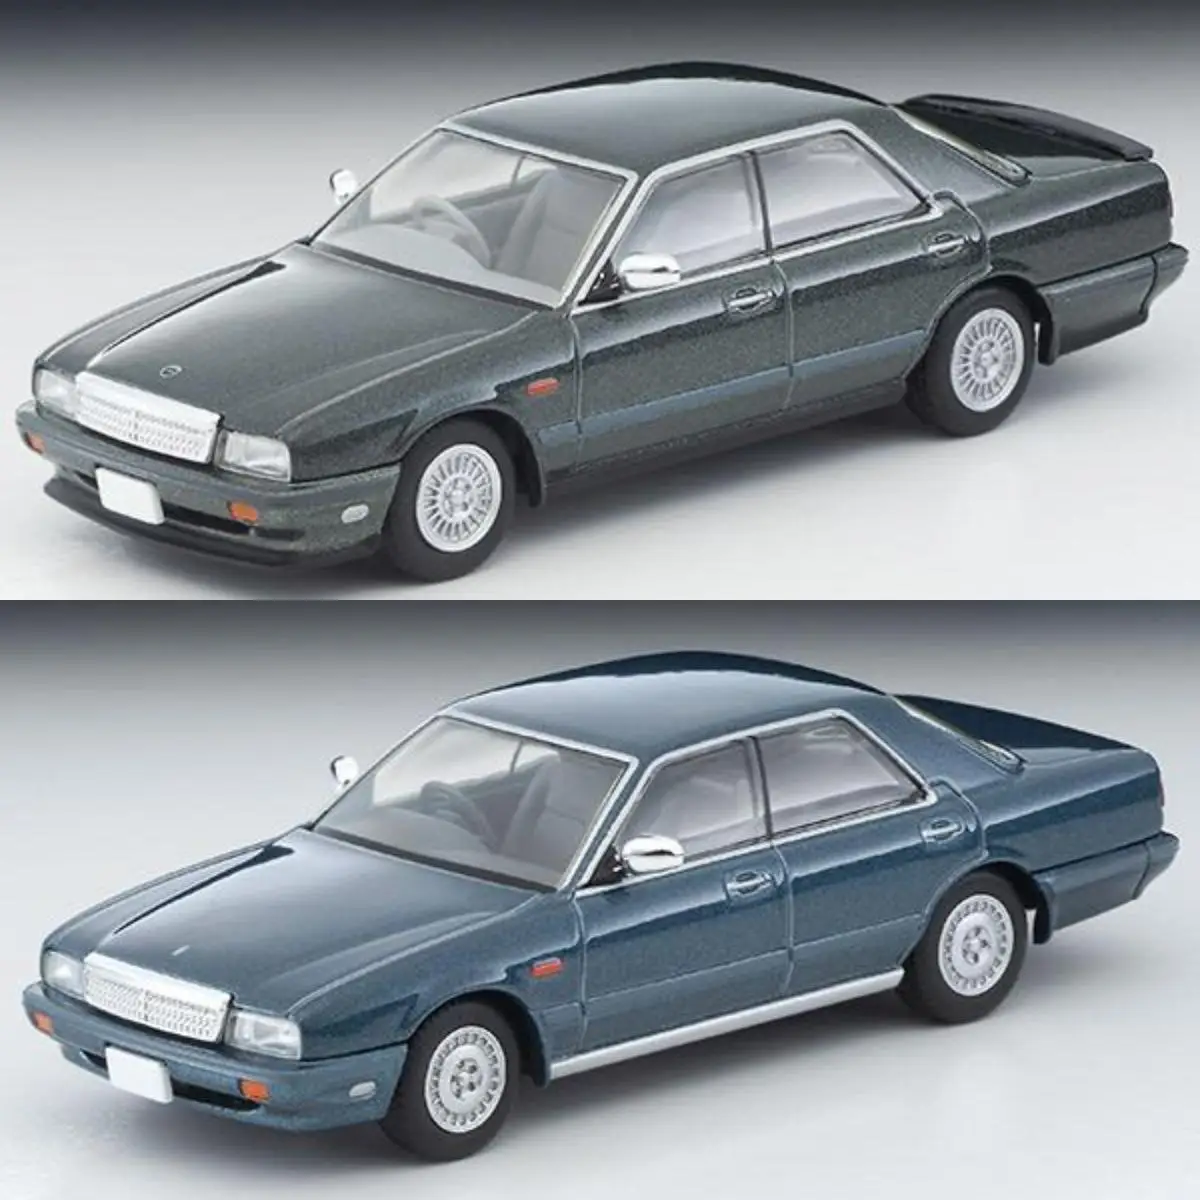 

23.8 Tomytec Tomica TLV N278 A/B Nissan Cedric Cima Type II Limited Edition Simulation Alloy Static Car Model Toy Gift